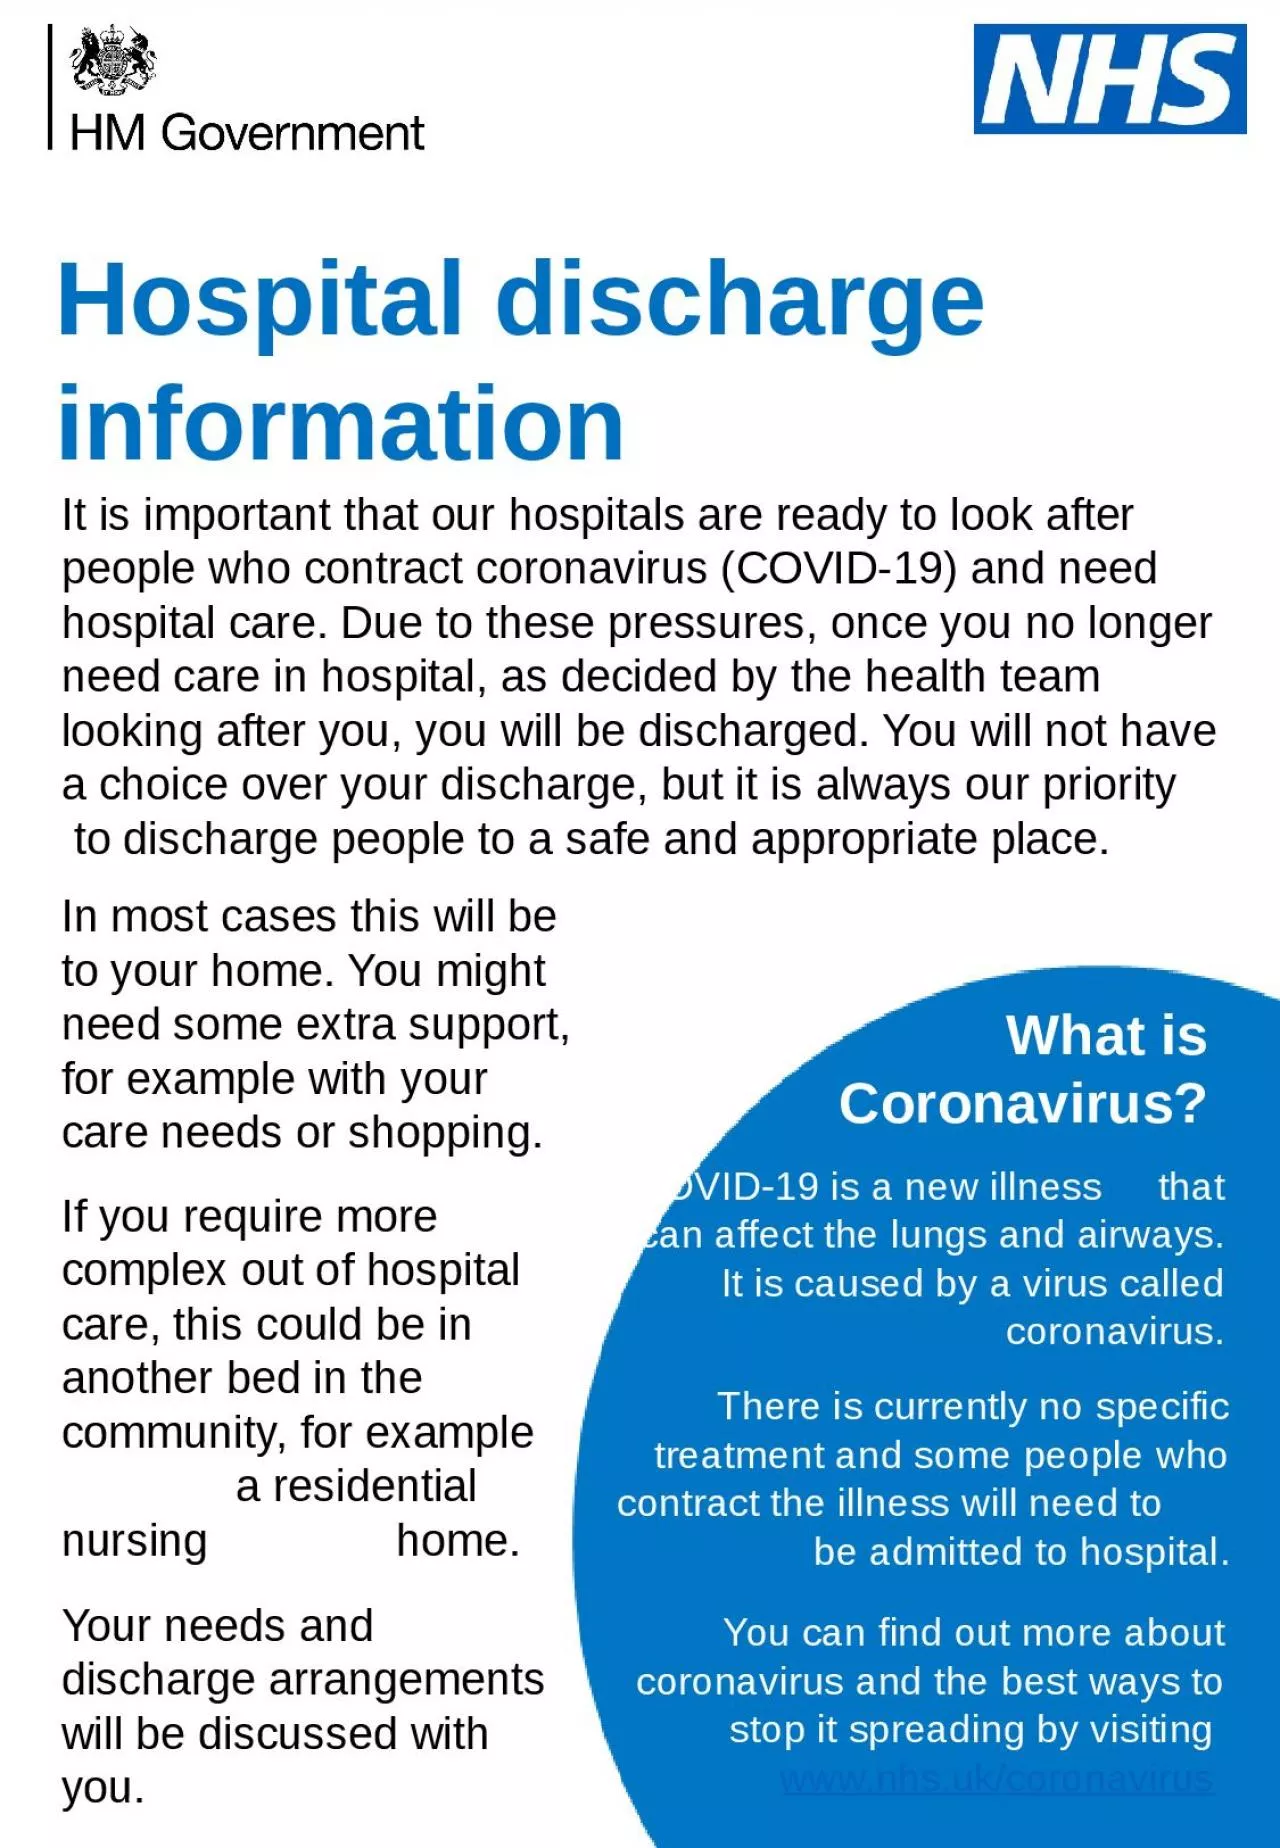 What is Coronavirus? It is important that our hospitals are ready to look after people